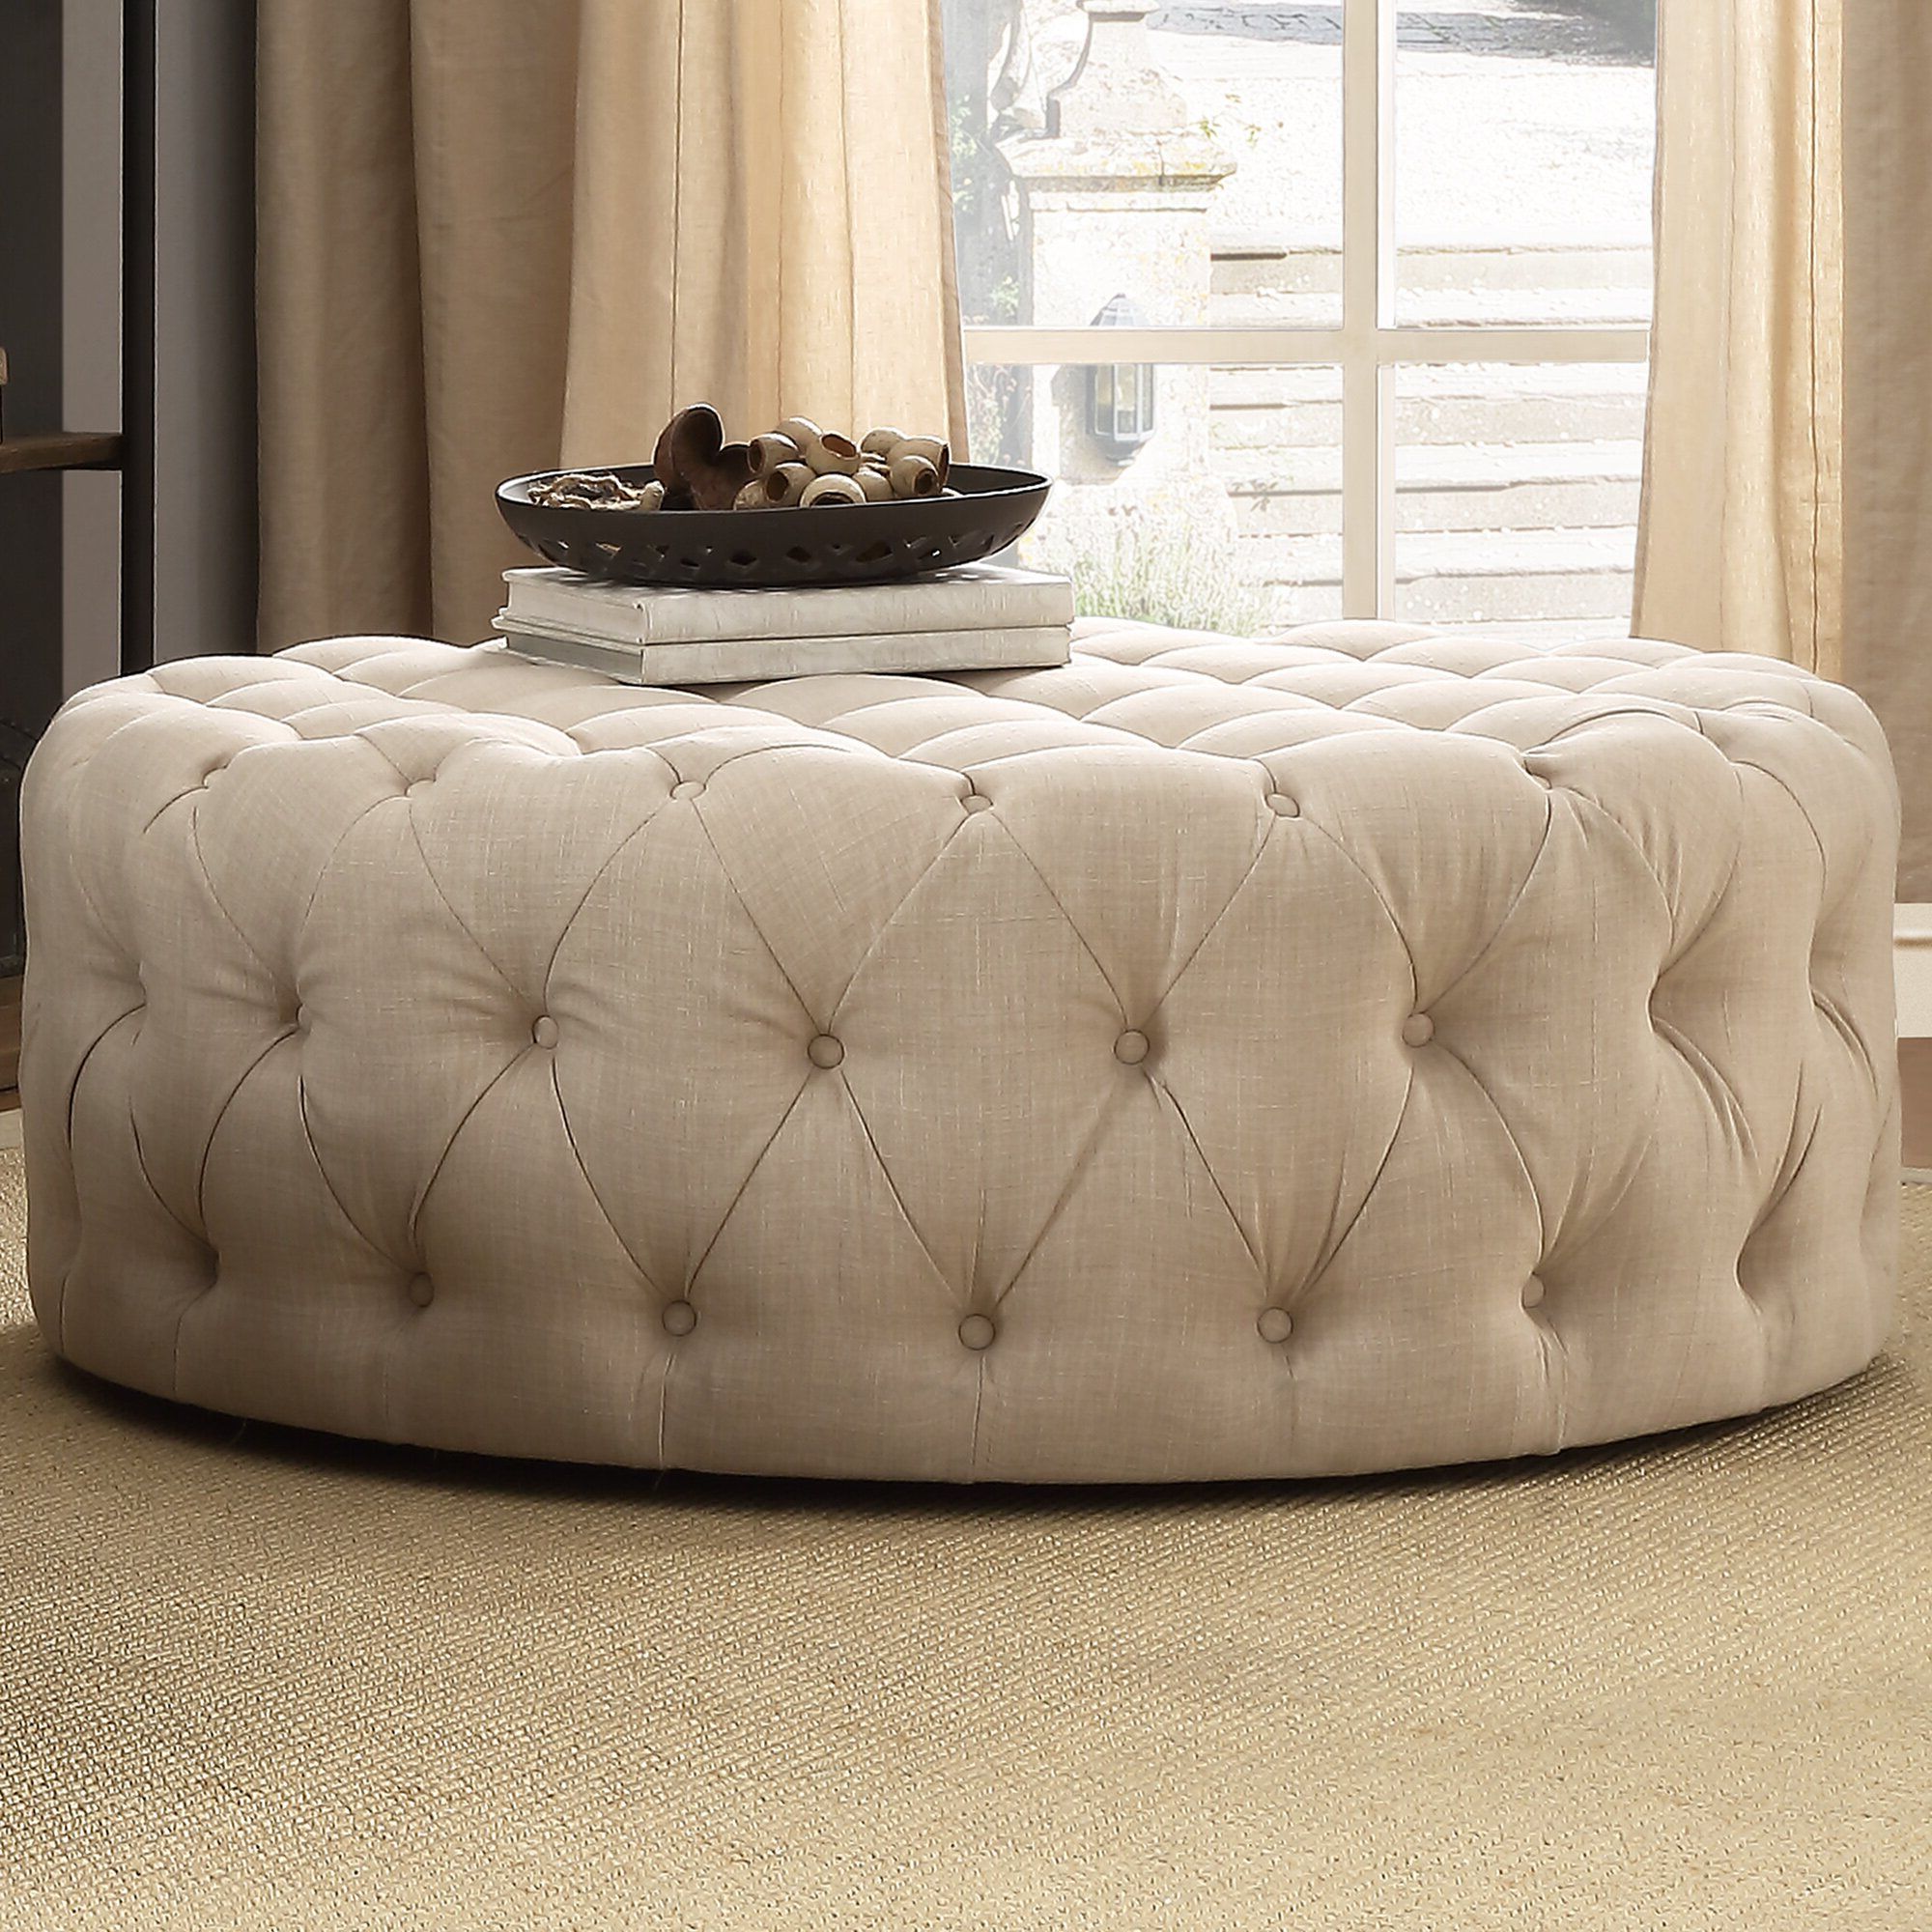 Wayfair Pertaining To Most Recently Released White Large Round Ottomans (View 4 of 10)